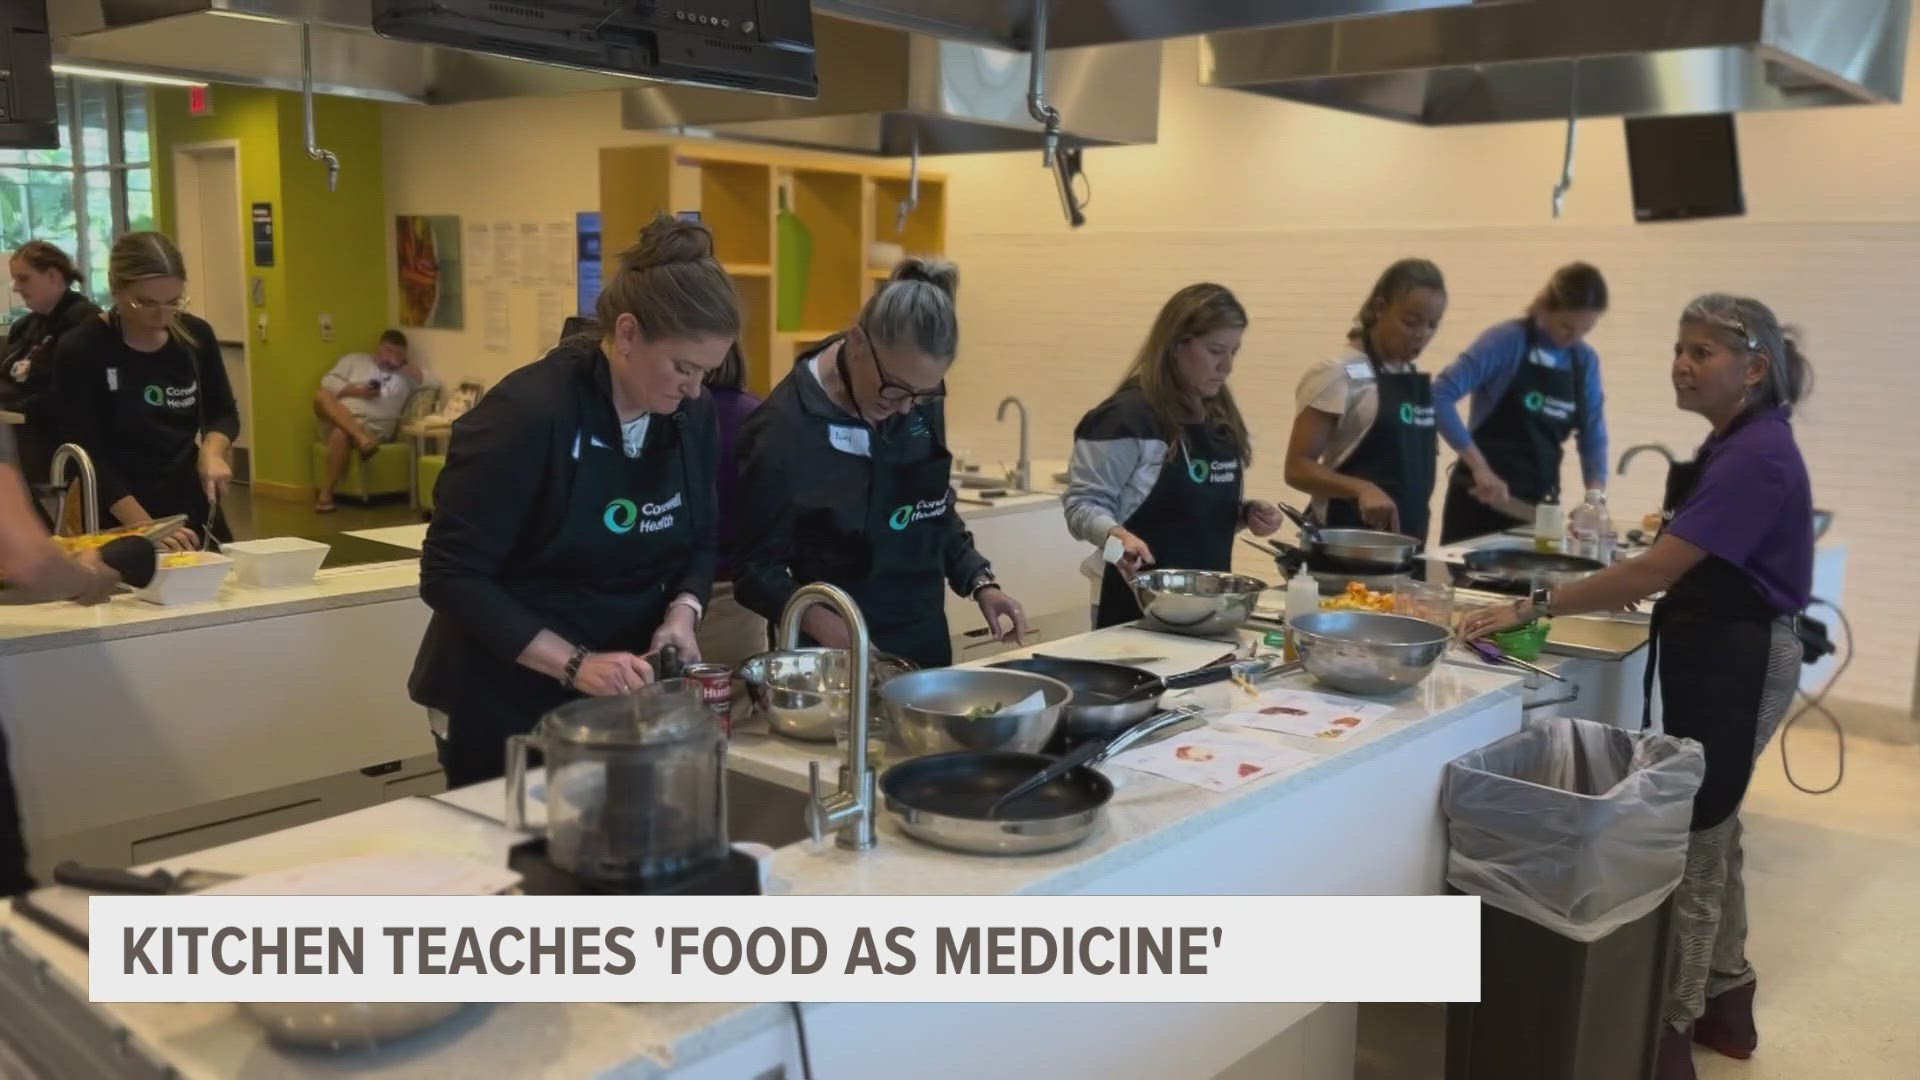 The Corewell Health Teaching Kitchen is part of its lifestyle medicine practice, teaching how to make food that tastes good and promotes health.